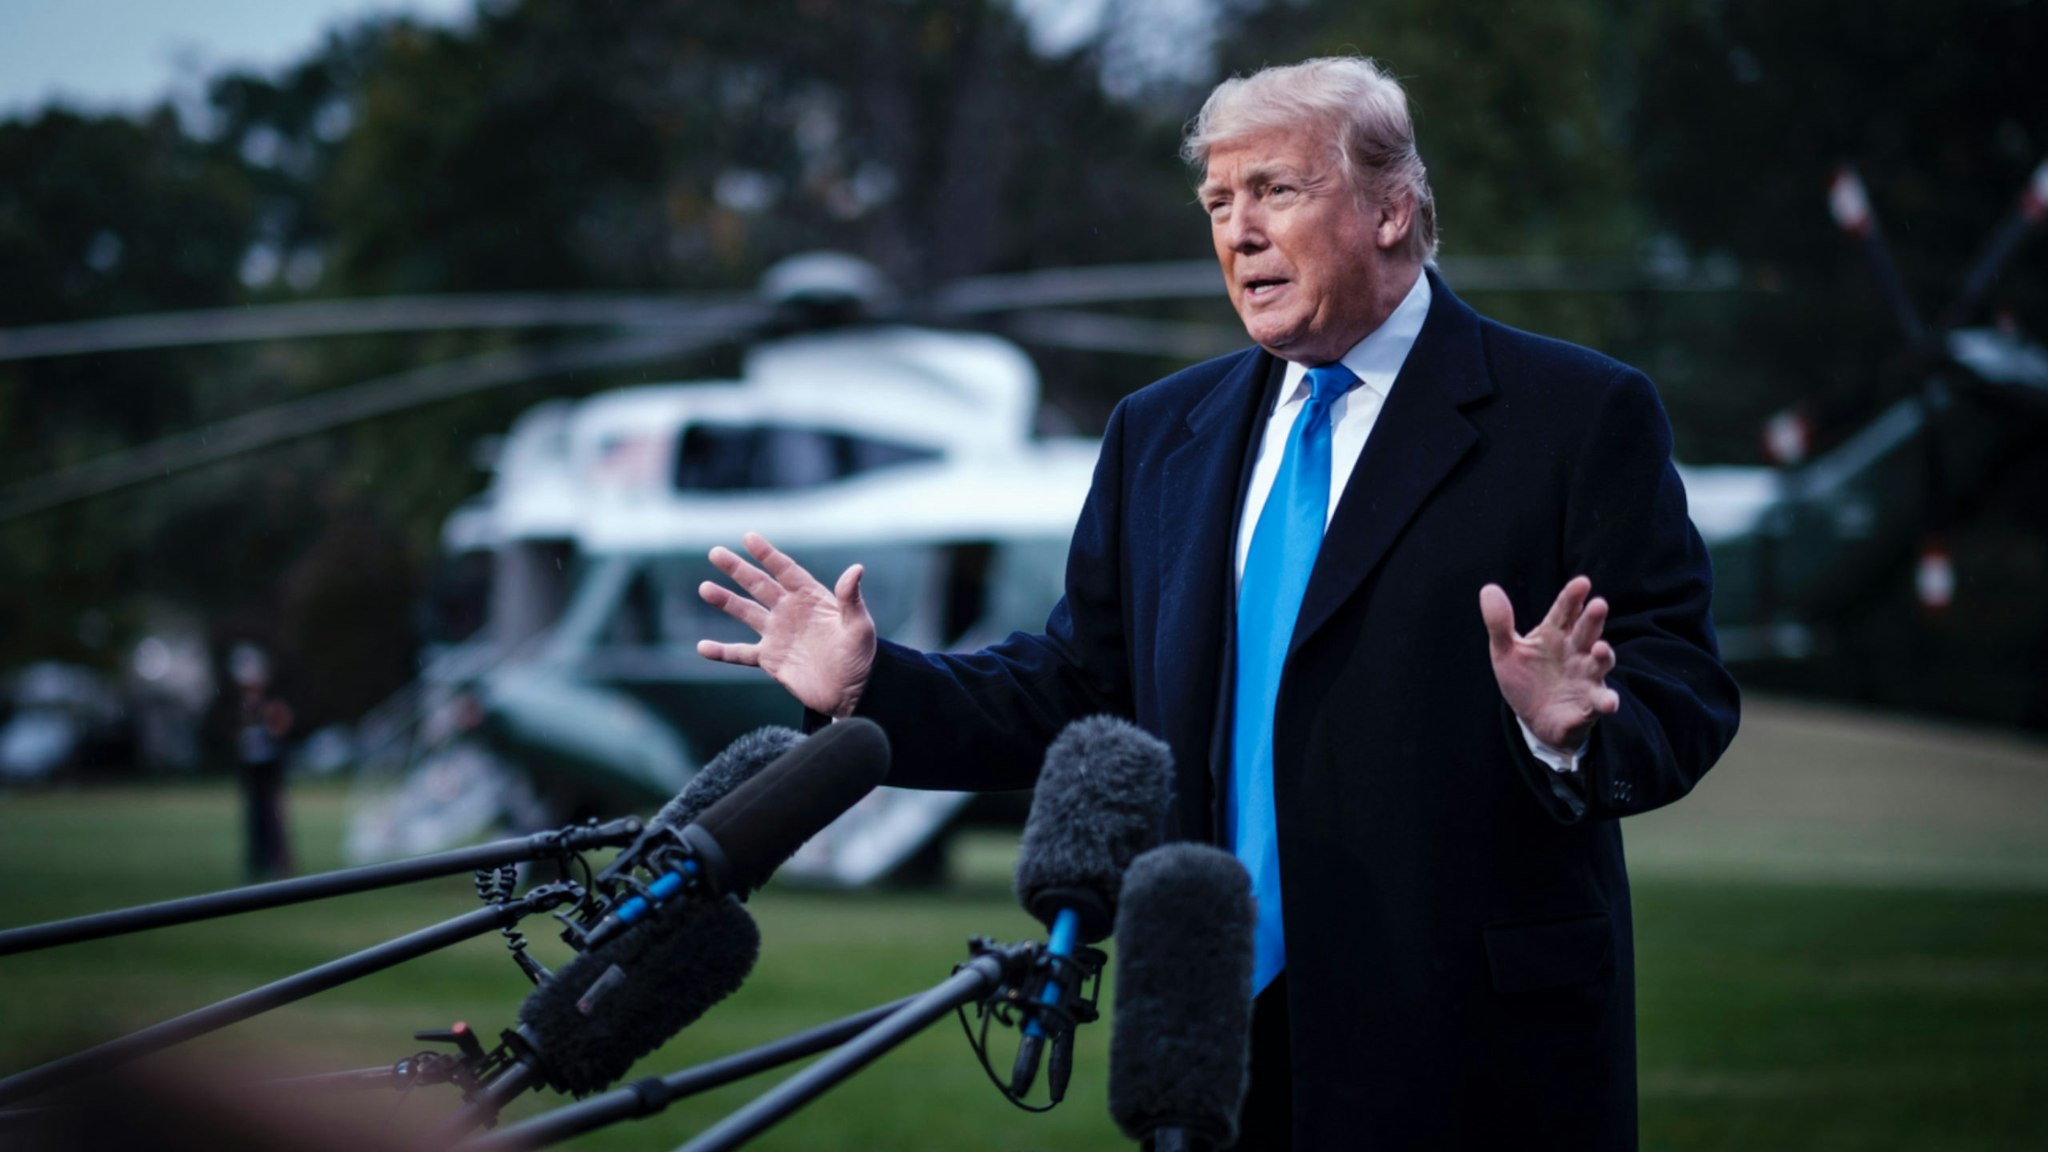 US President Donald Trump speaks to the media as he prepares to board Marine One on the South Lawn of the White House on October 26, 2018 in Washington, DC. Trump was traveling to a rally in Charlotte, NC.